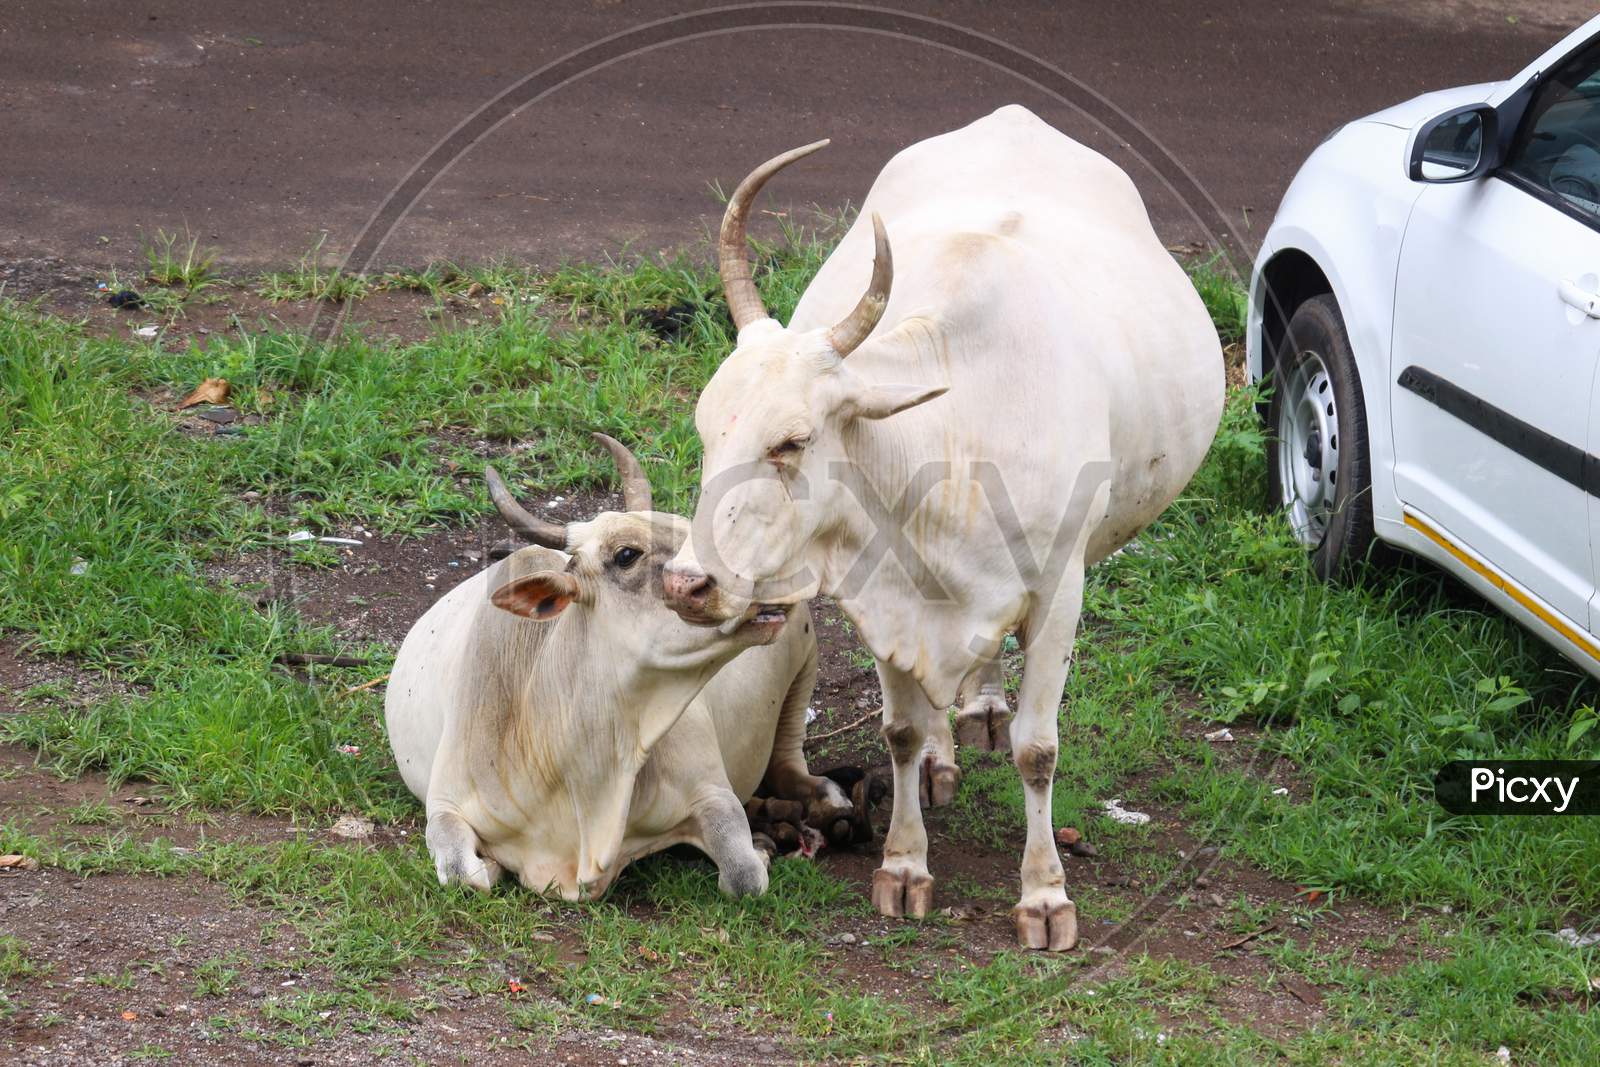 Cows showing affection to each other on Indian road